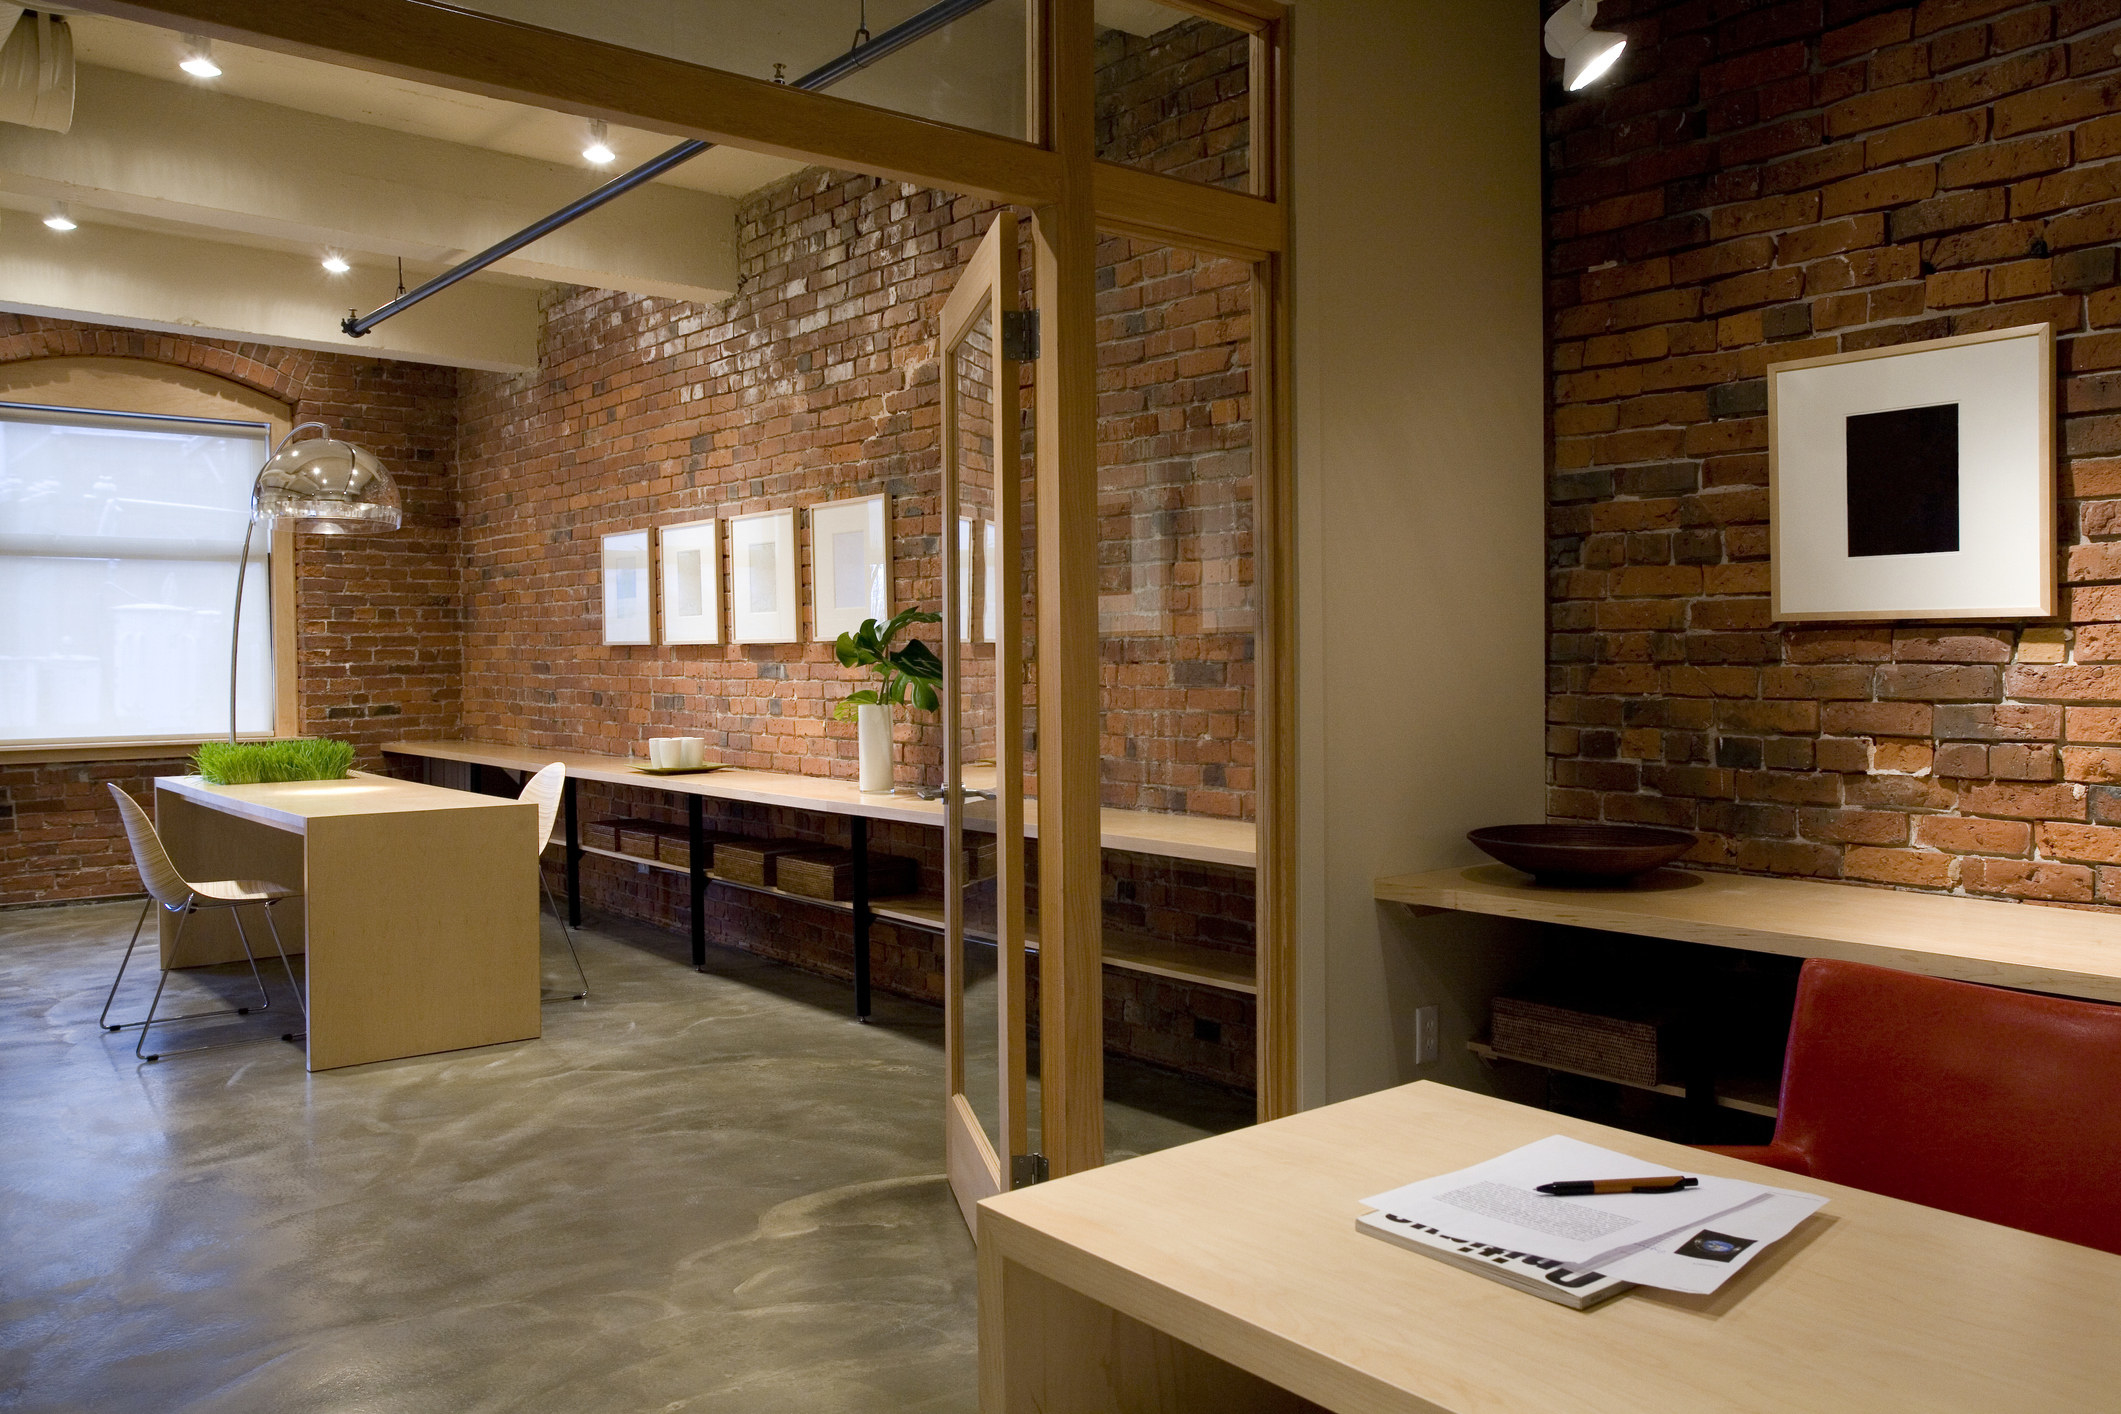 An office space with concrete floors